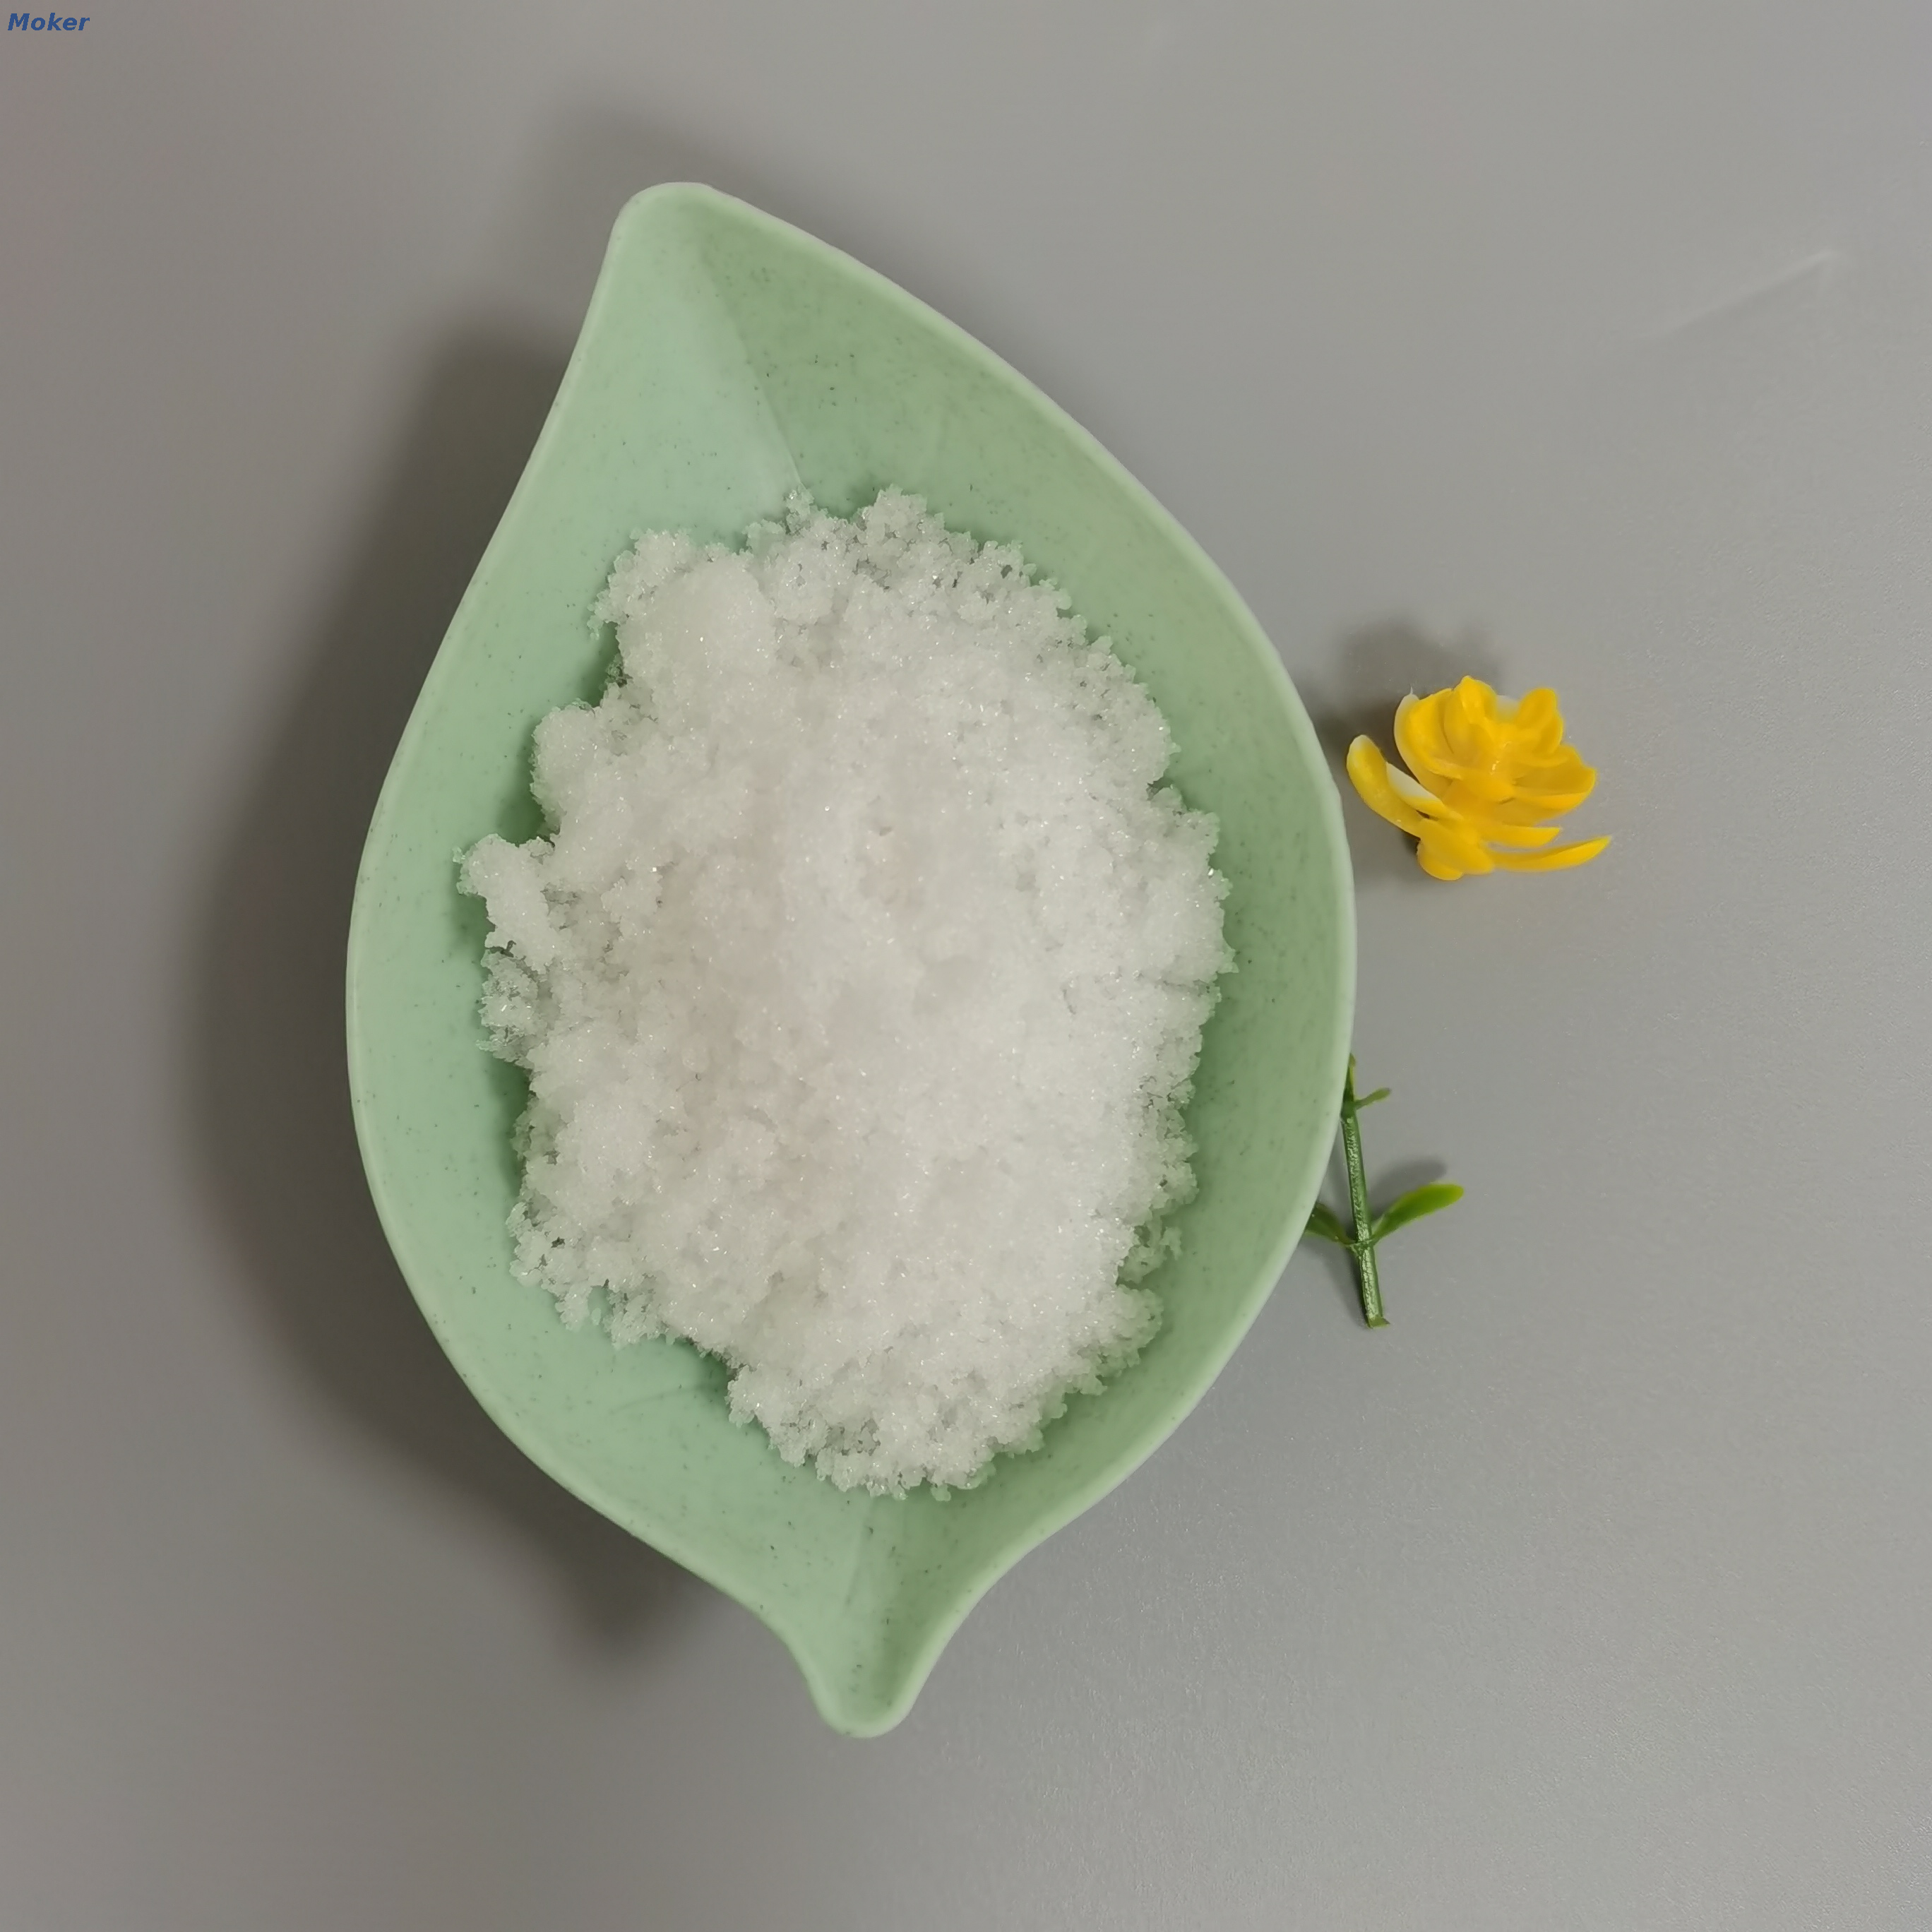 An Anti-inflammatory/analgesic Agent Local Anesthetic Mepivacaine HCl CAS 1722-62-9